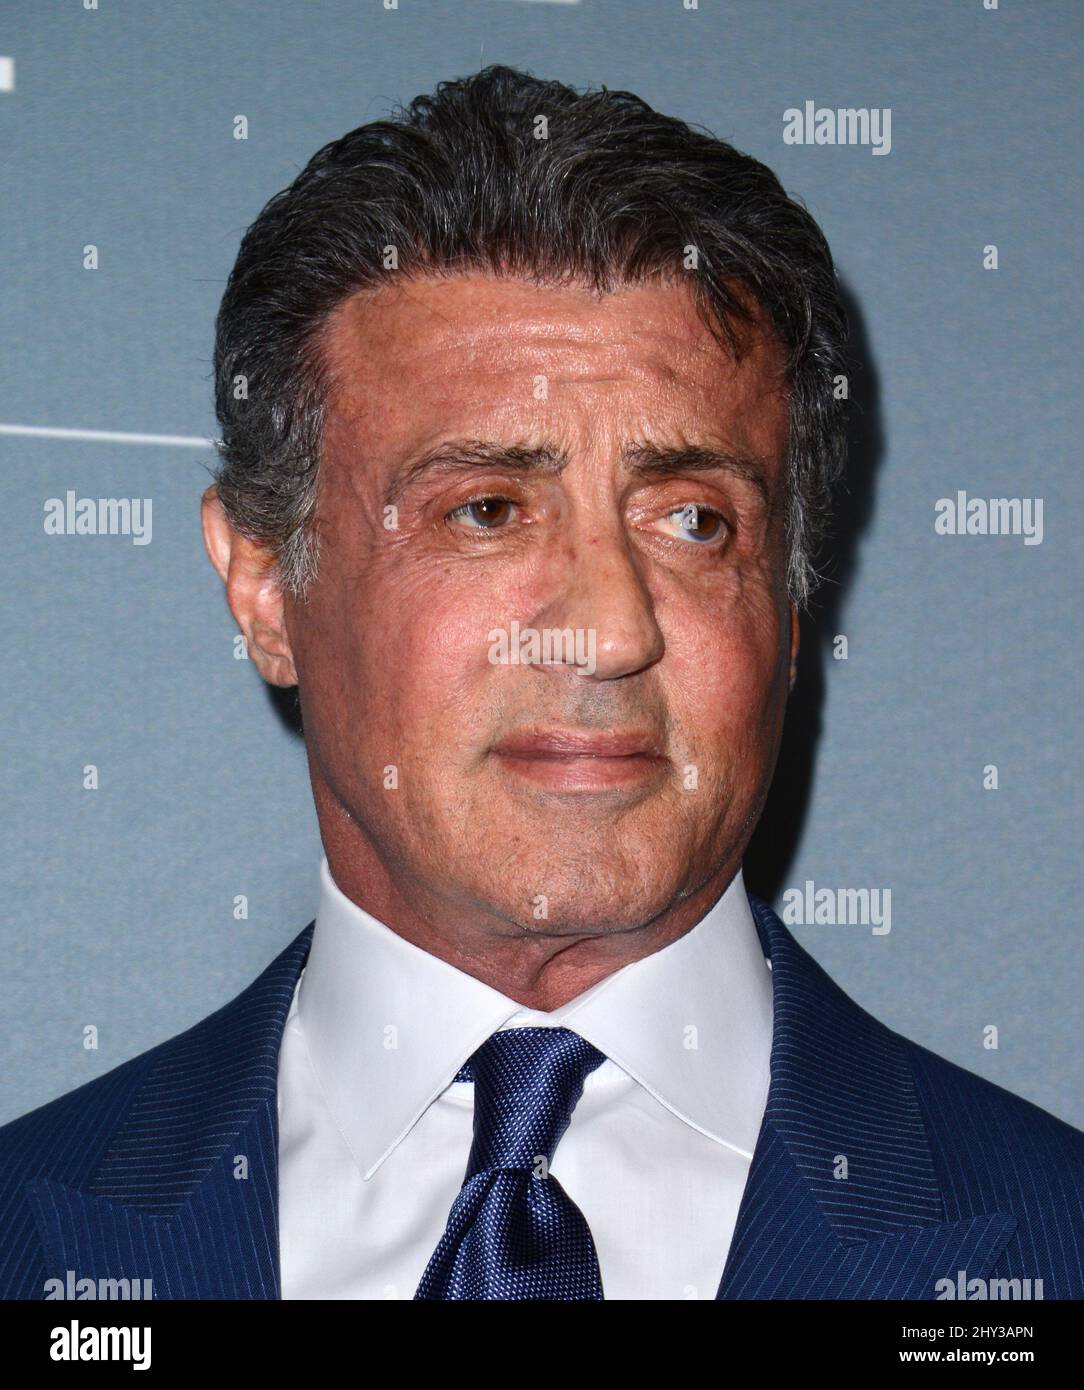 Sylvester Stallone attending the 2014 UNICEF Ball in Los Angeles Stock Photo